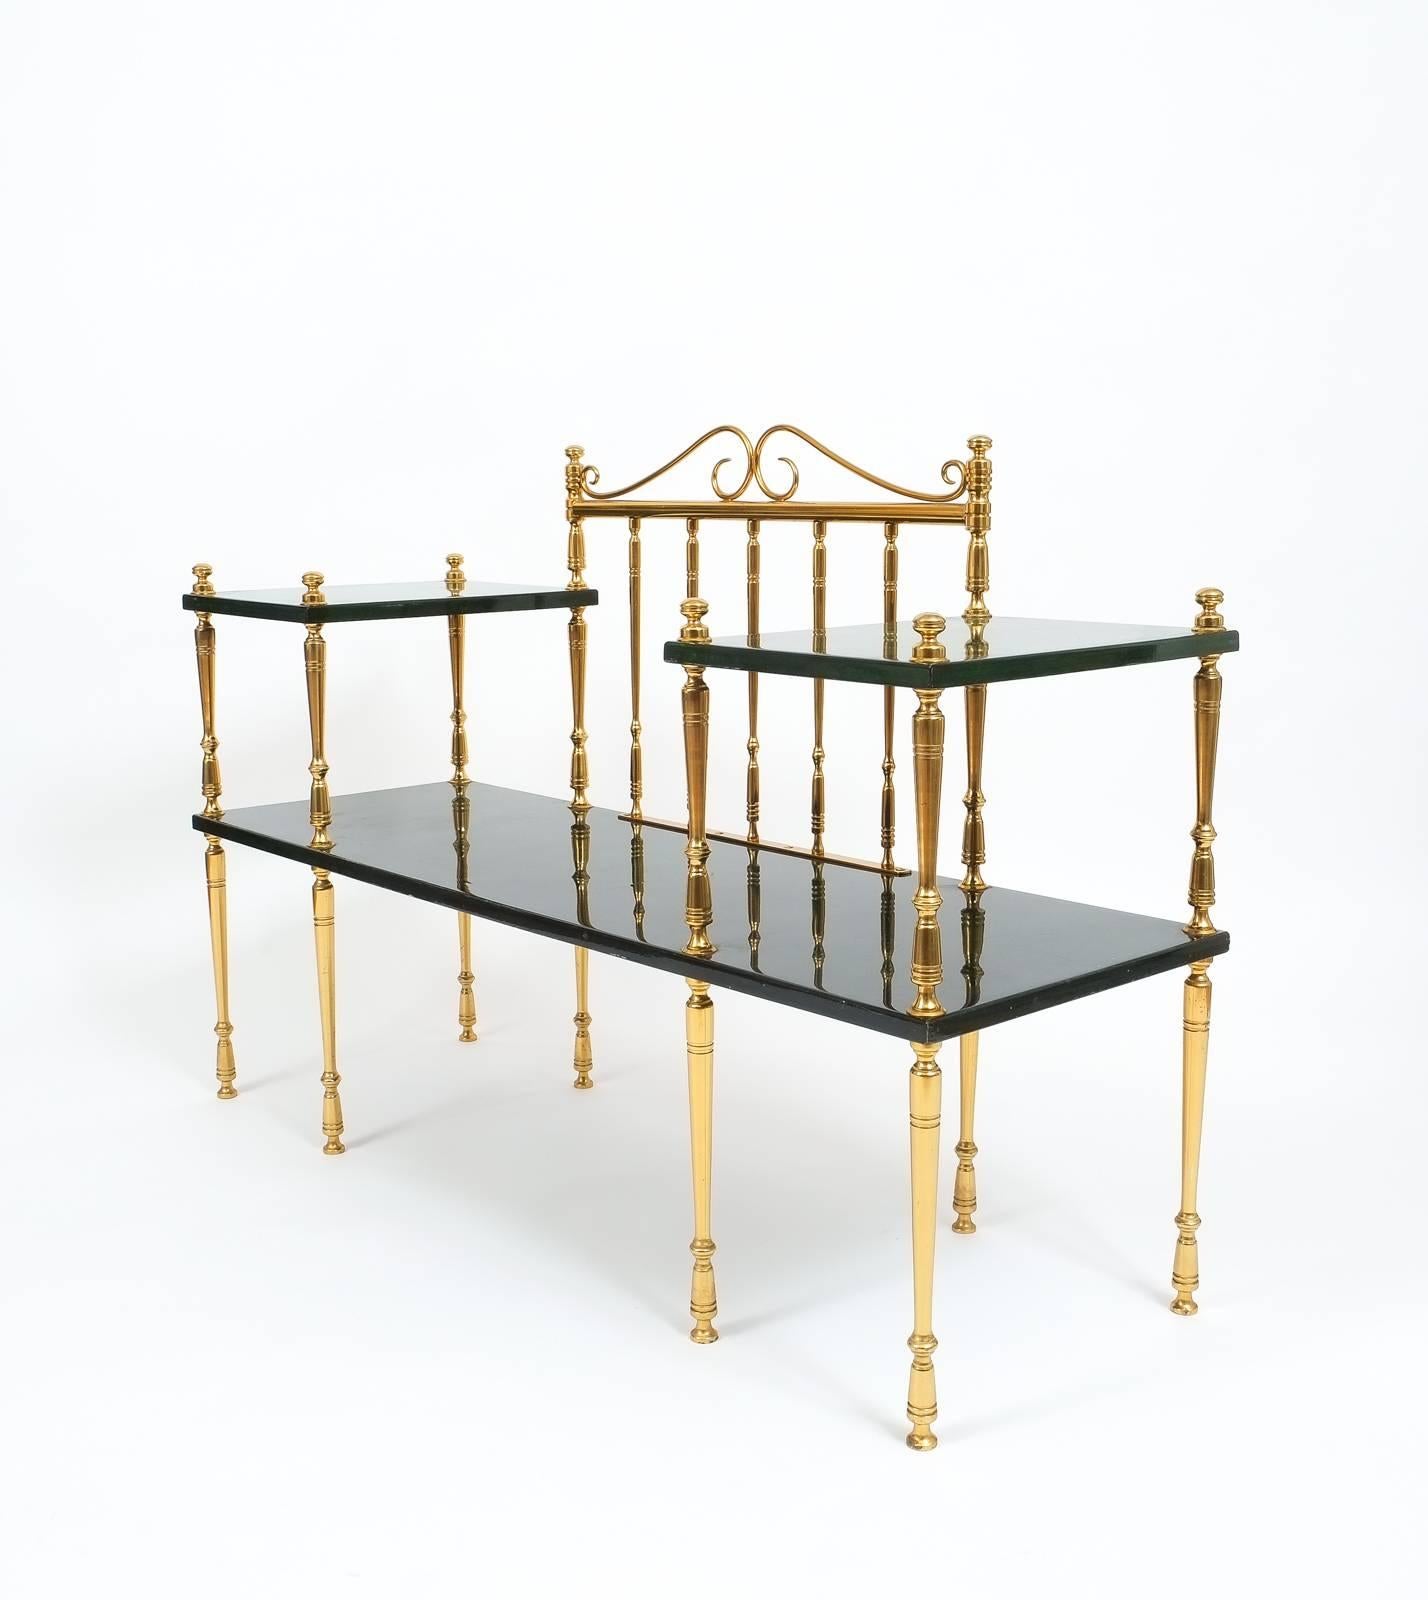 Mid-Century Modern Rare Aldo Tura Green Parchment and Brass Bench or Table, circa 1960